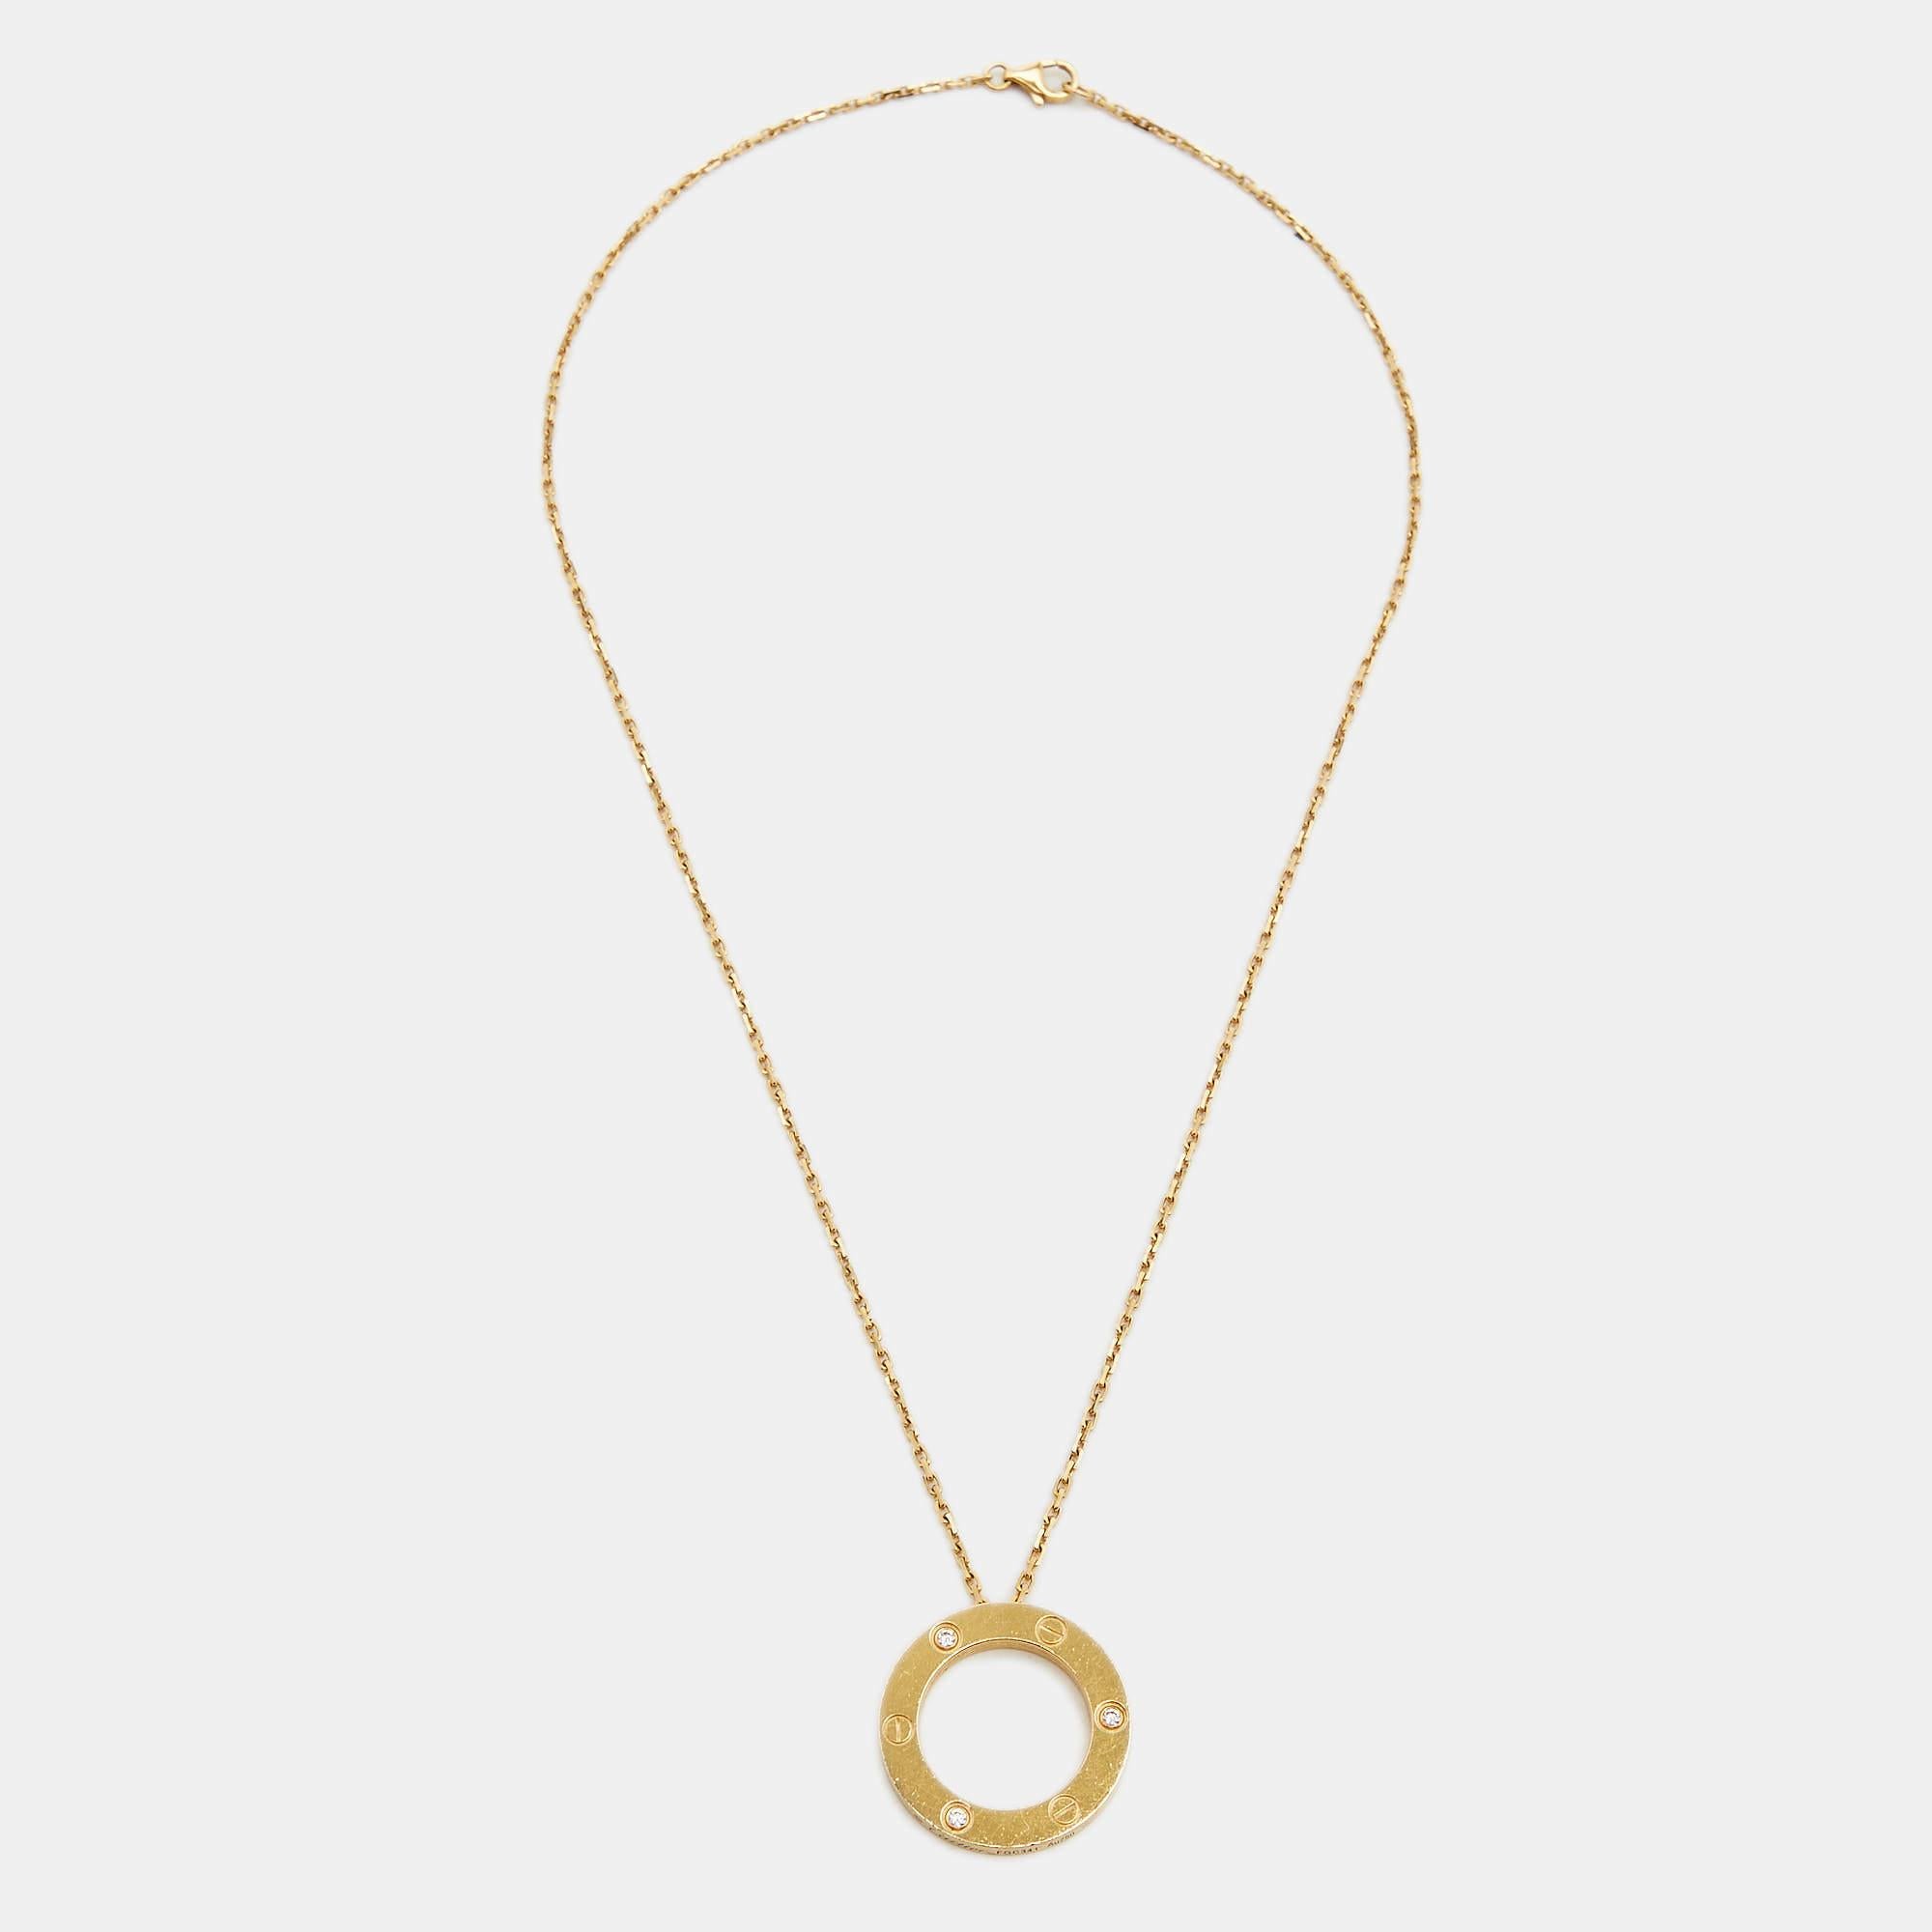 This radiant Love necklace from Cartier is not only beautiful to look at but also a timeless piece that will be cherished for years to come! It has been crafted from 18K yellow gold and features a chain-link carrying a ring pendant that is detailed